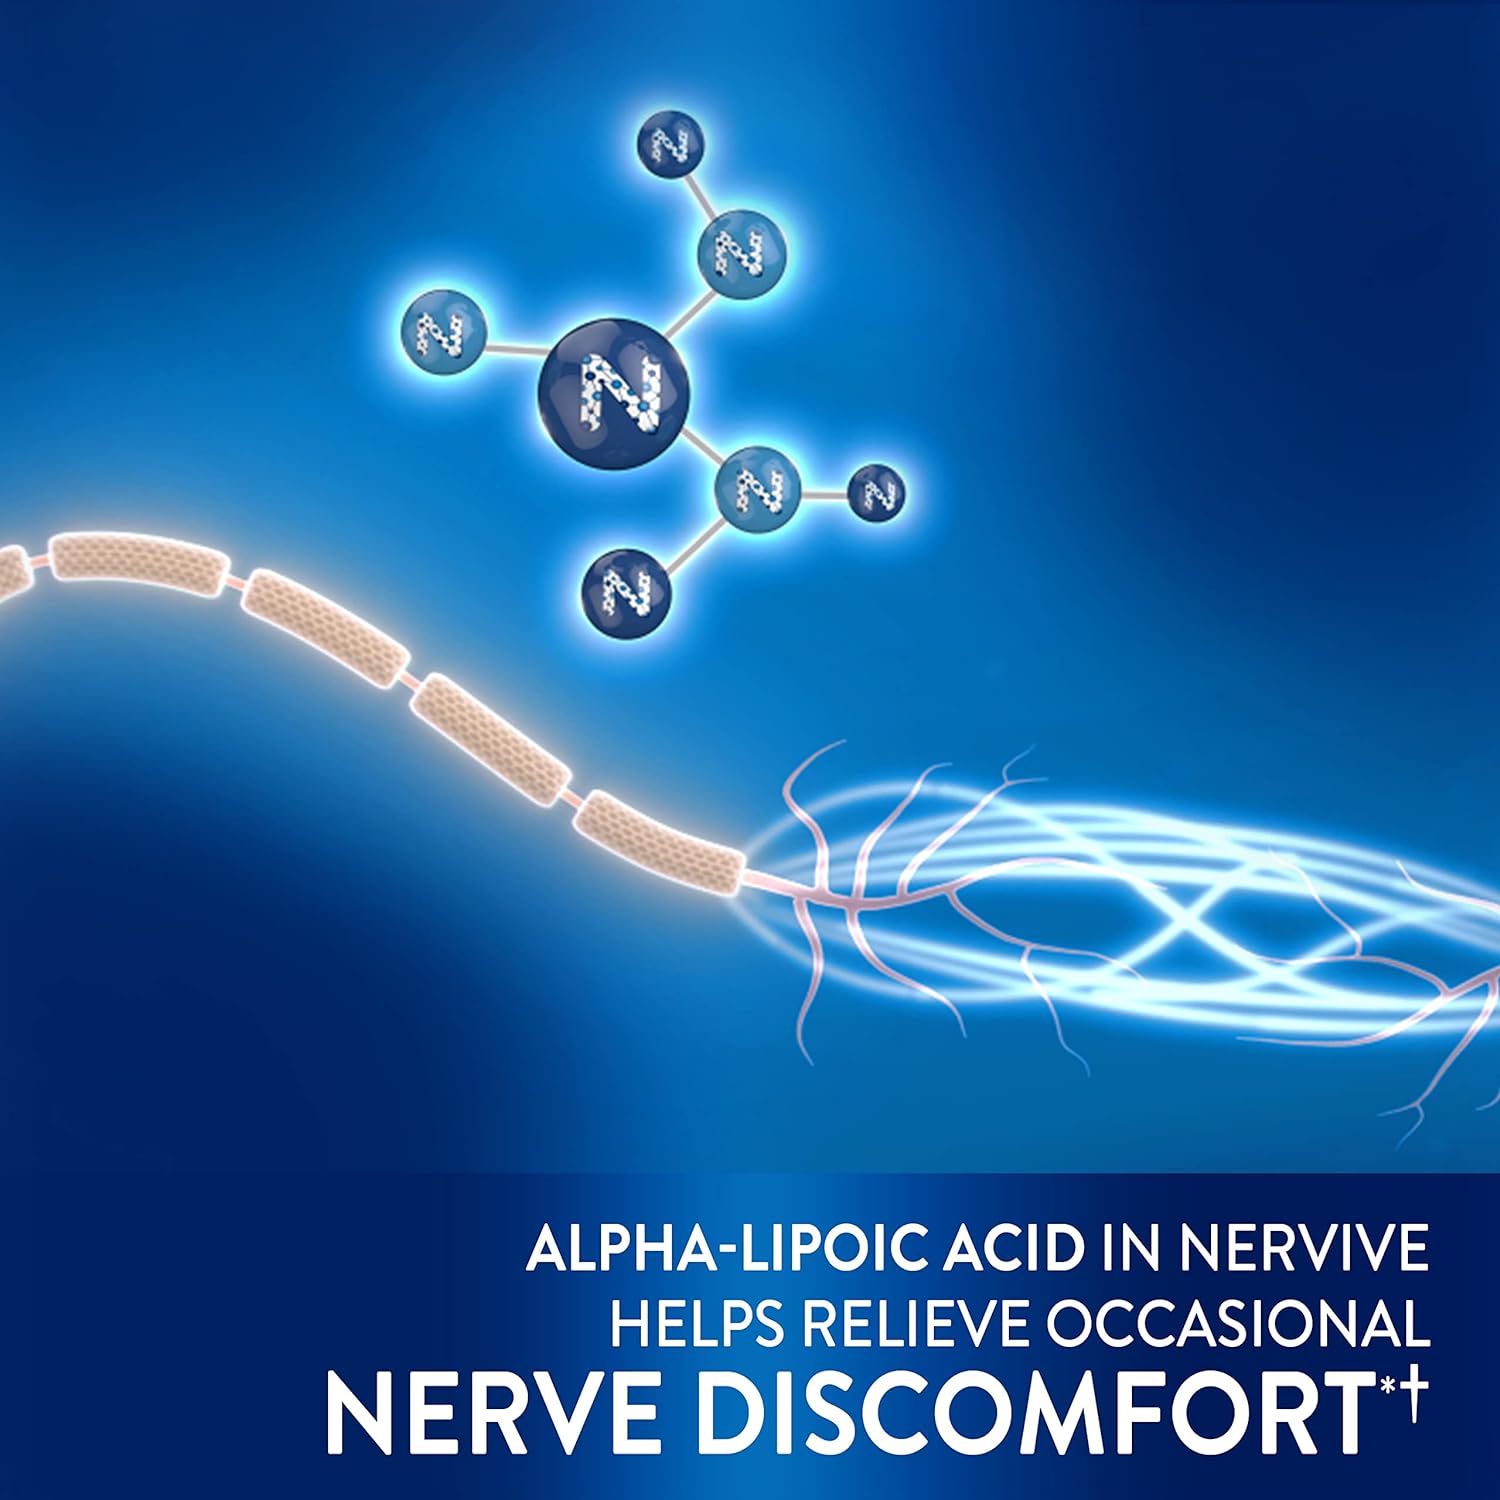 Nervive Advanced Nerve Relief + Mobility, with Alpha Lipoic Acid to Help Reduce Nerve Aches, Weakness, & Discomfort*† and Boswellia to Promote Mobility*, Vitamins B12,B6,B1, 30 Tablets : Health & Household